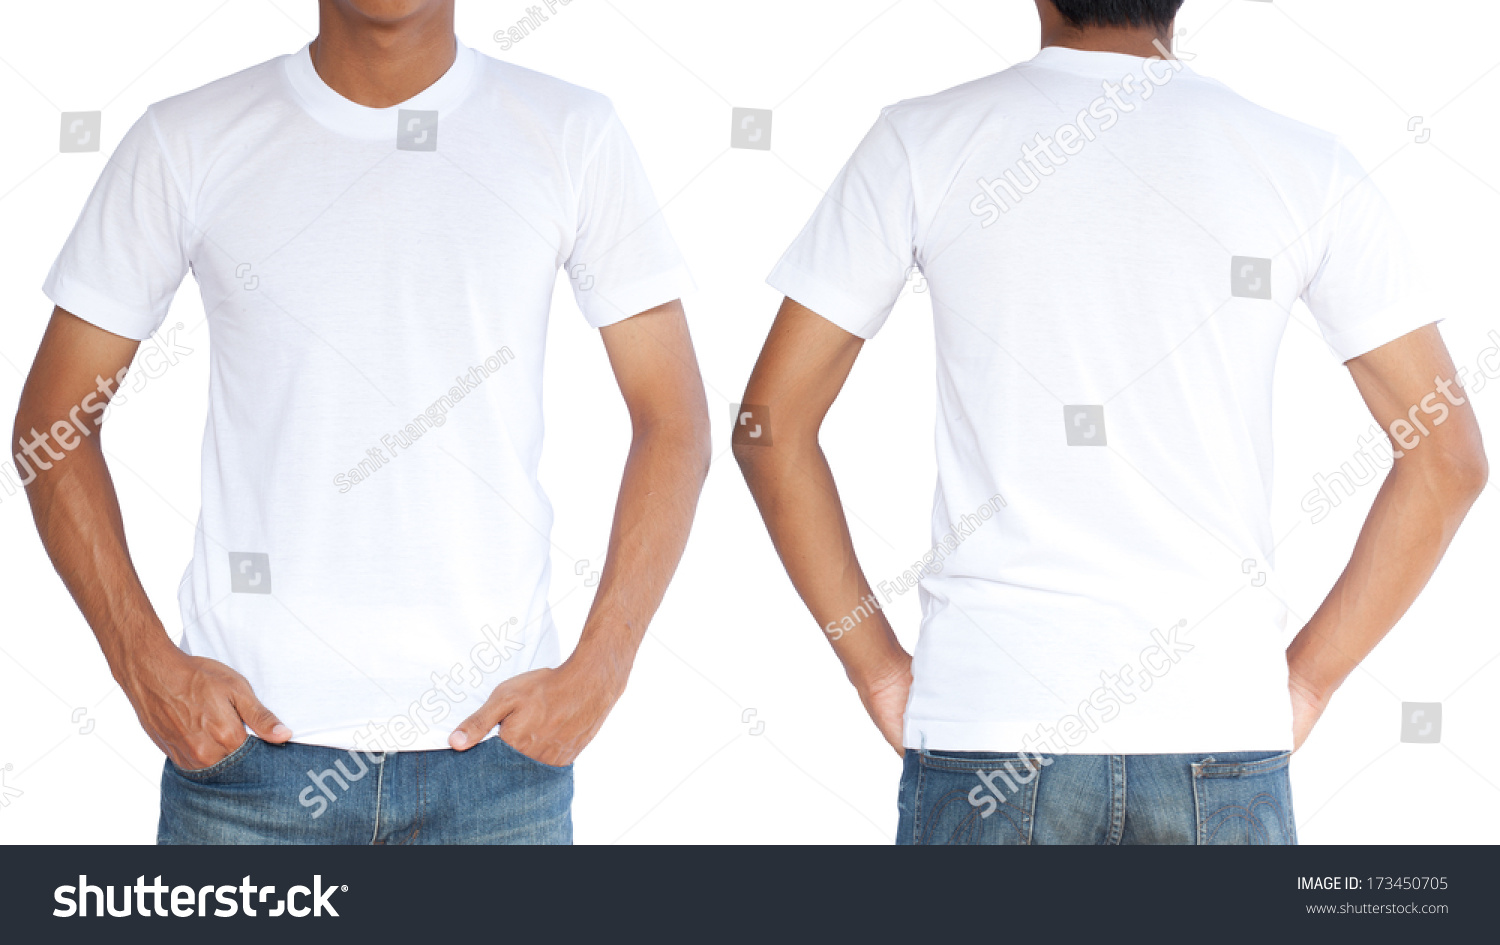 Download White Tshirt On Young Man Template Stock Photo 173450705 - Shutterstock